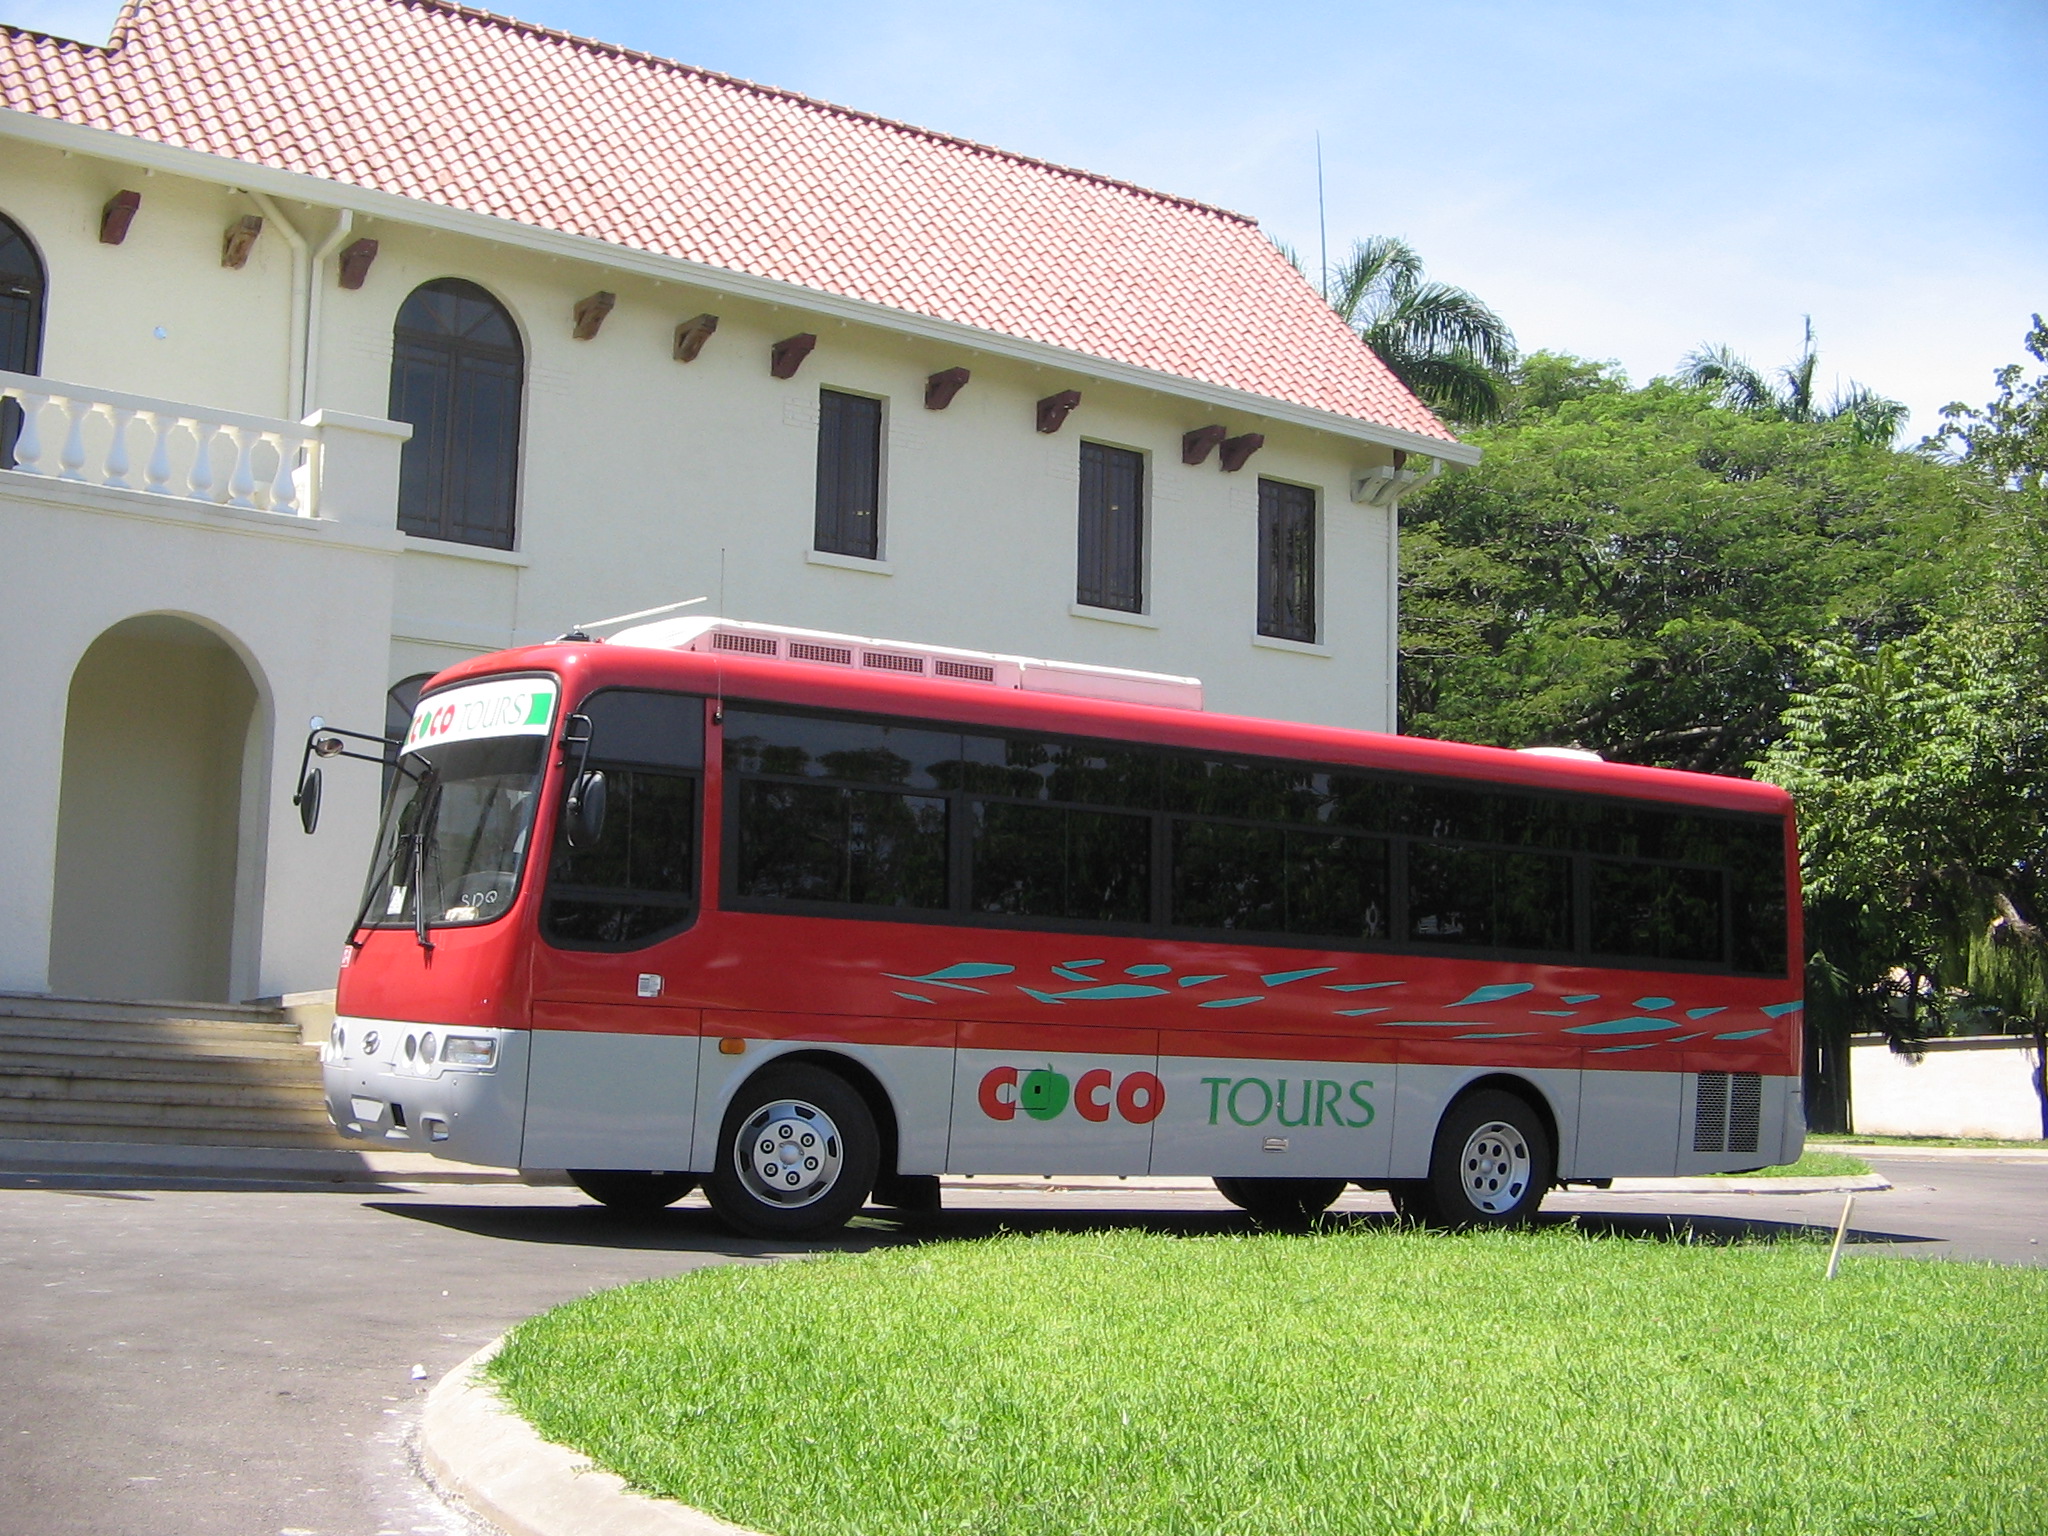 Larger Cocotours bus used on the route from Amber Cove to Samana